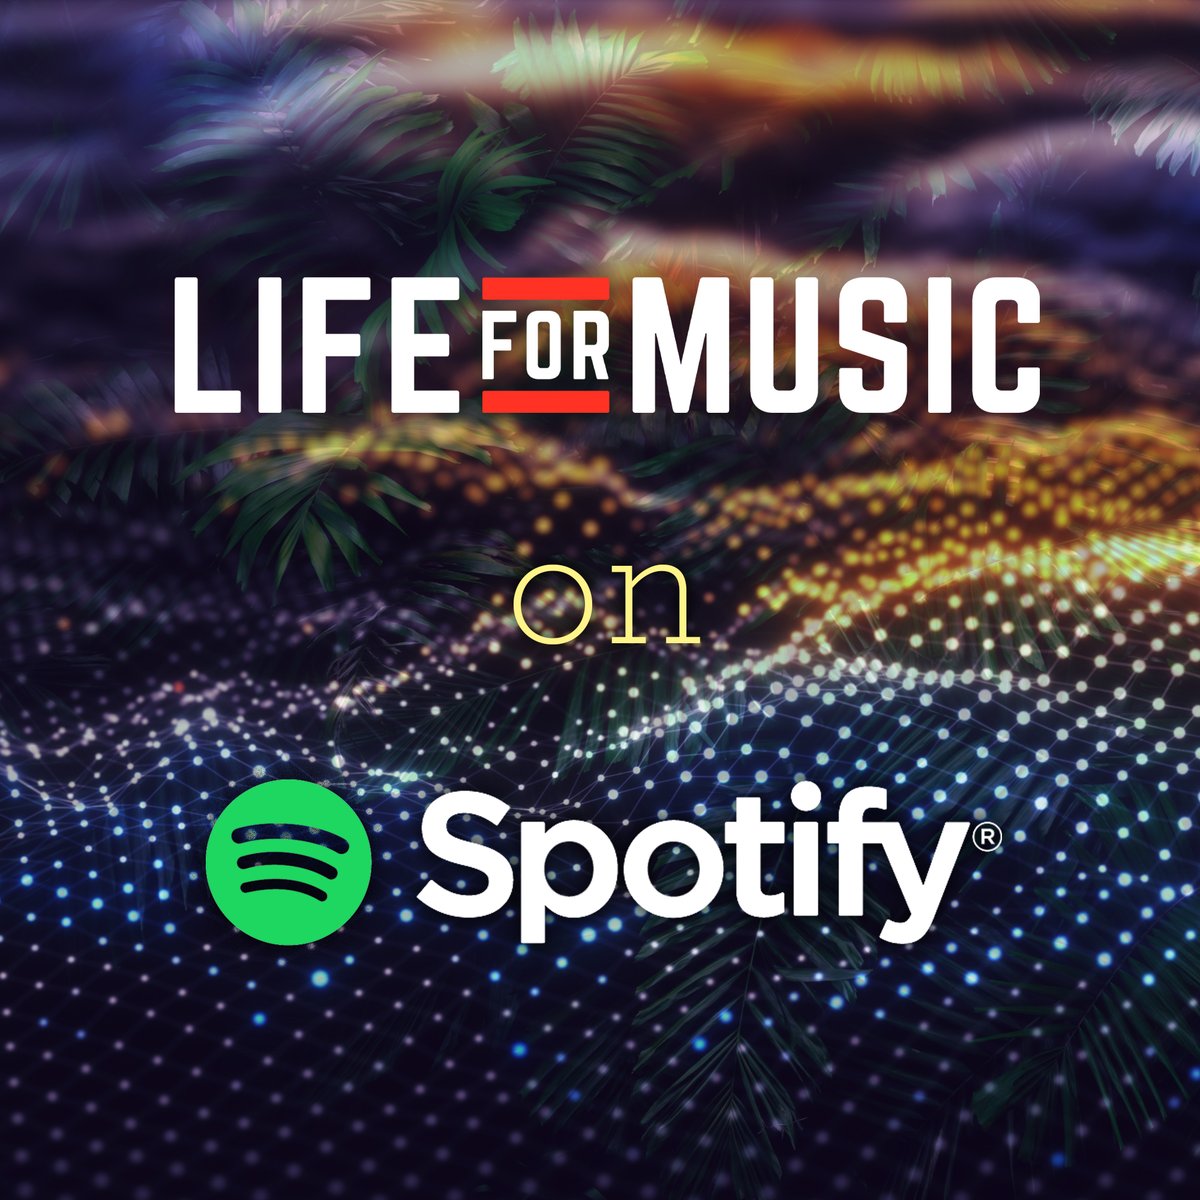 Listen to all Life For Music tracks on Spotify here: open.spotify.com/playlist/4b5jh…

#dnb  #lifefmhq #lifeformusic #newdnb #techno  #newdnbmusic #newdnbrelease #music  #Spotify  #drumandbassfamily #cygnus  #dnblife #dnbnation